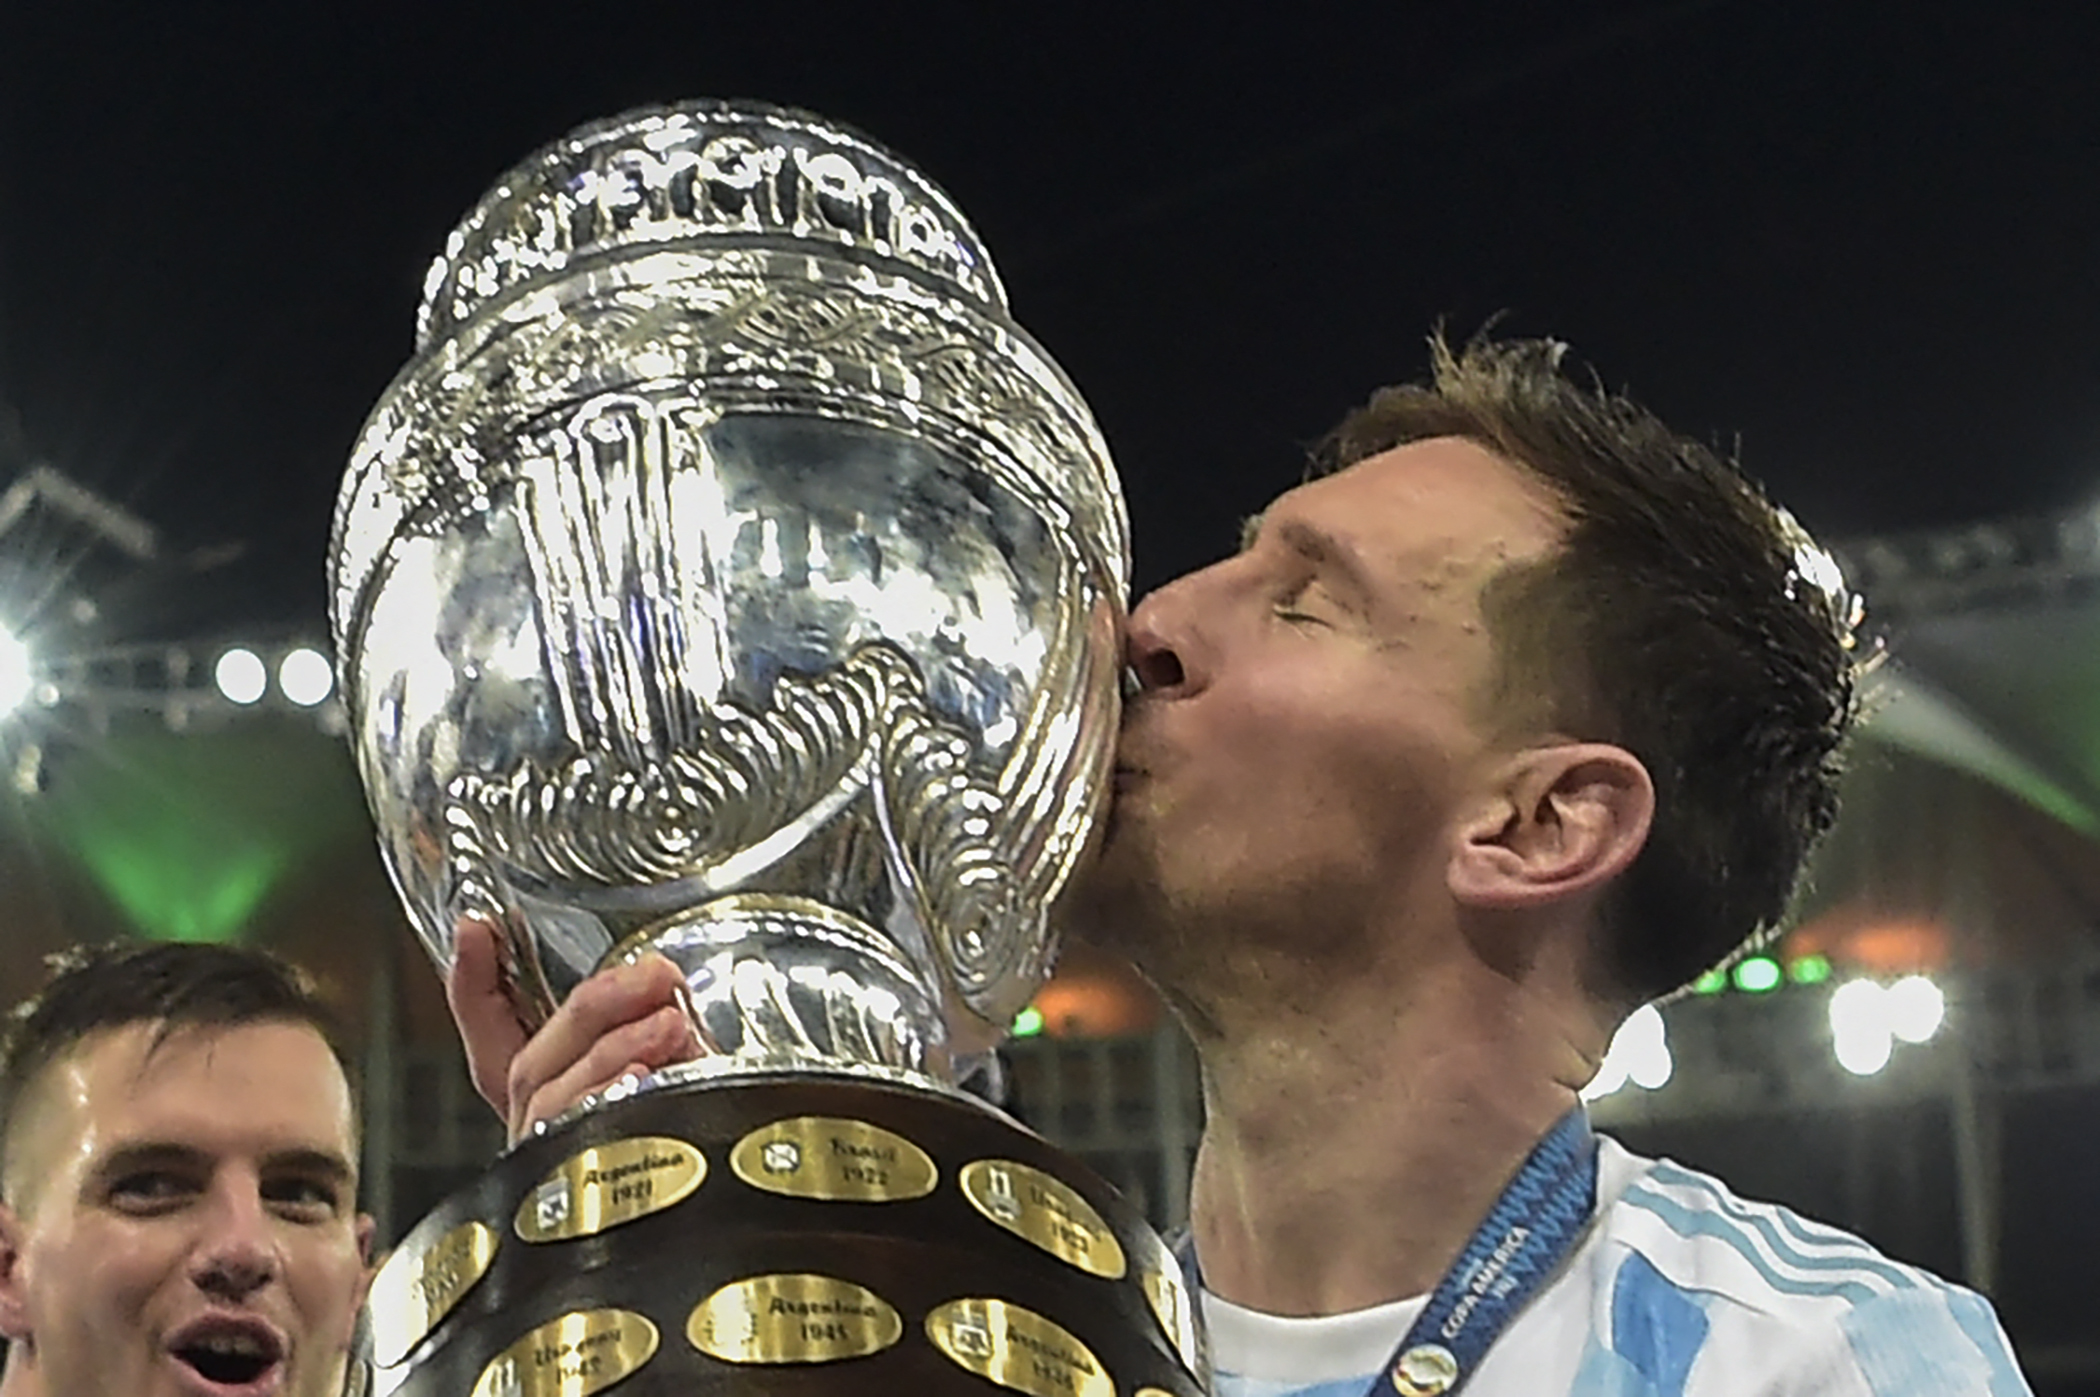 Messi ends Trophy drought as Argentina beats Brazil in Copa America final